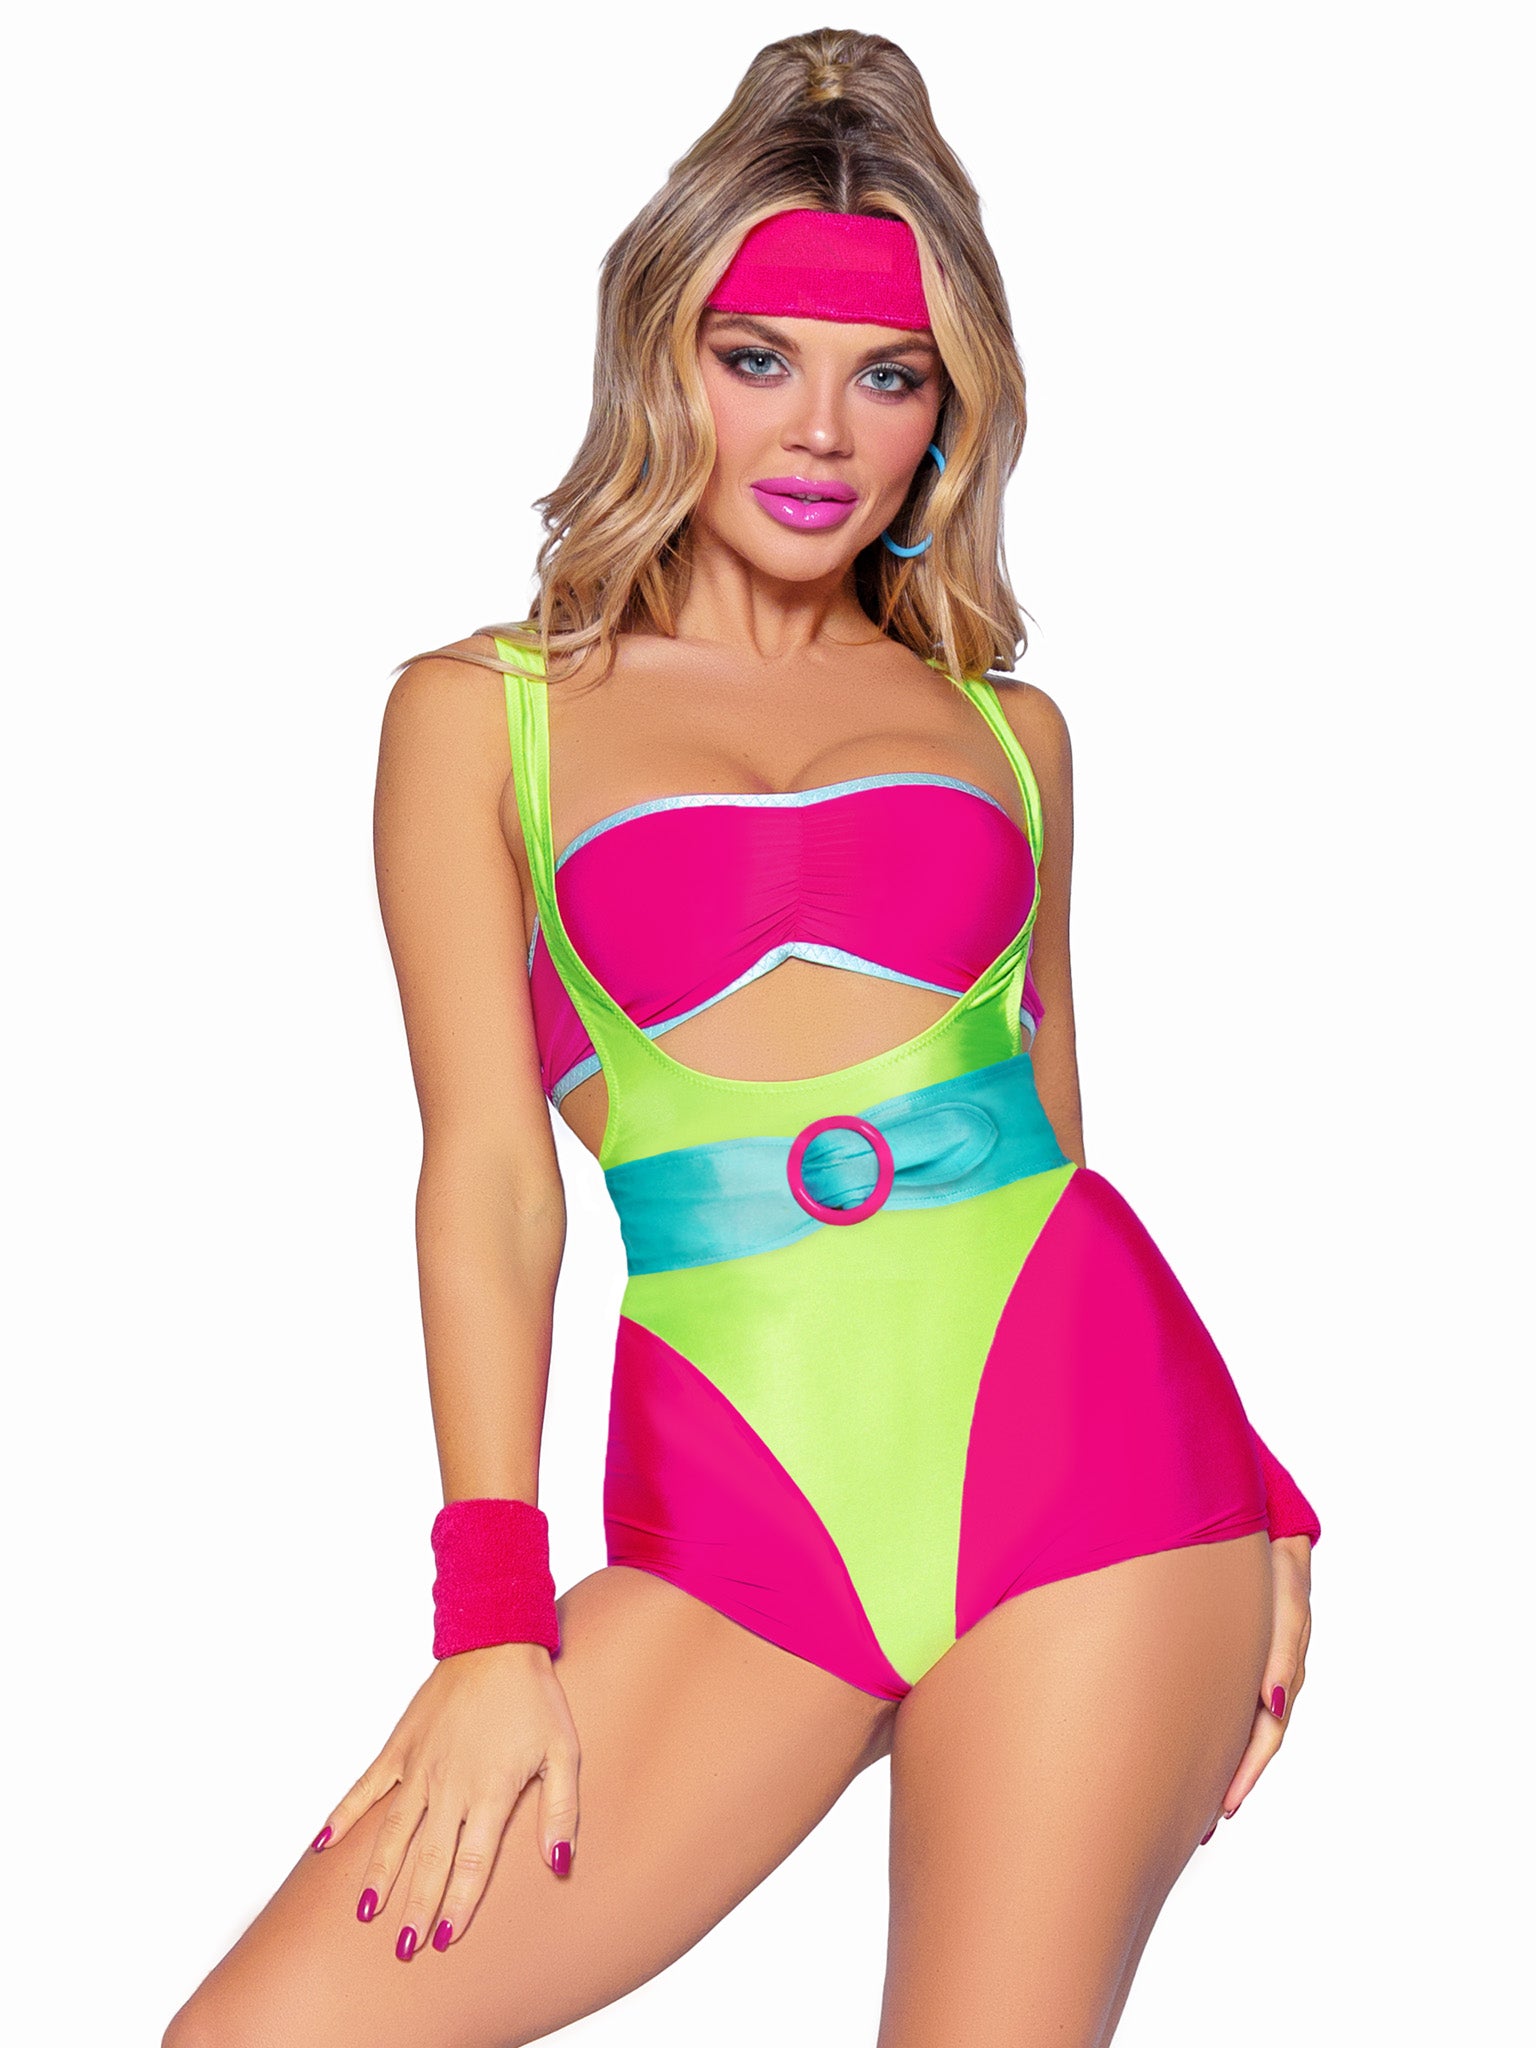 Women's Plus Size 80s Workout Romper Costume - Extra Large/XXL